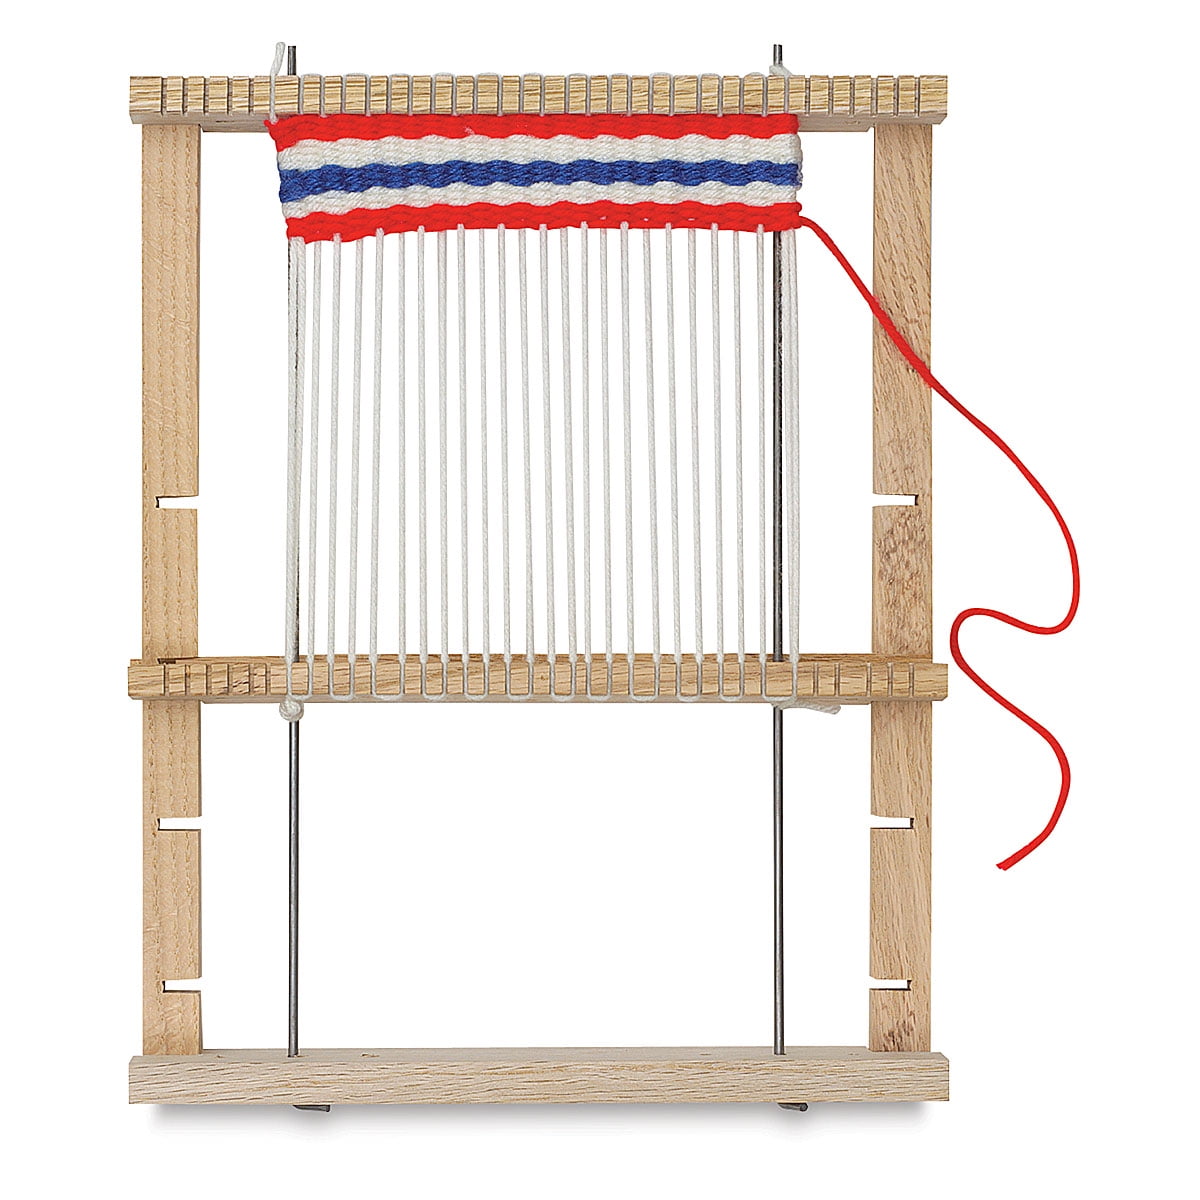 Weaving Loom with Loopers Kit by Creatology™